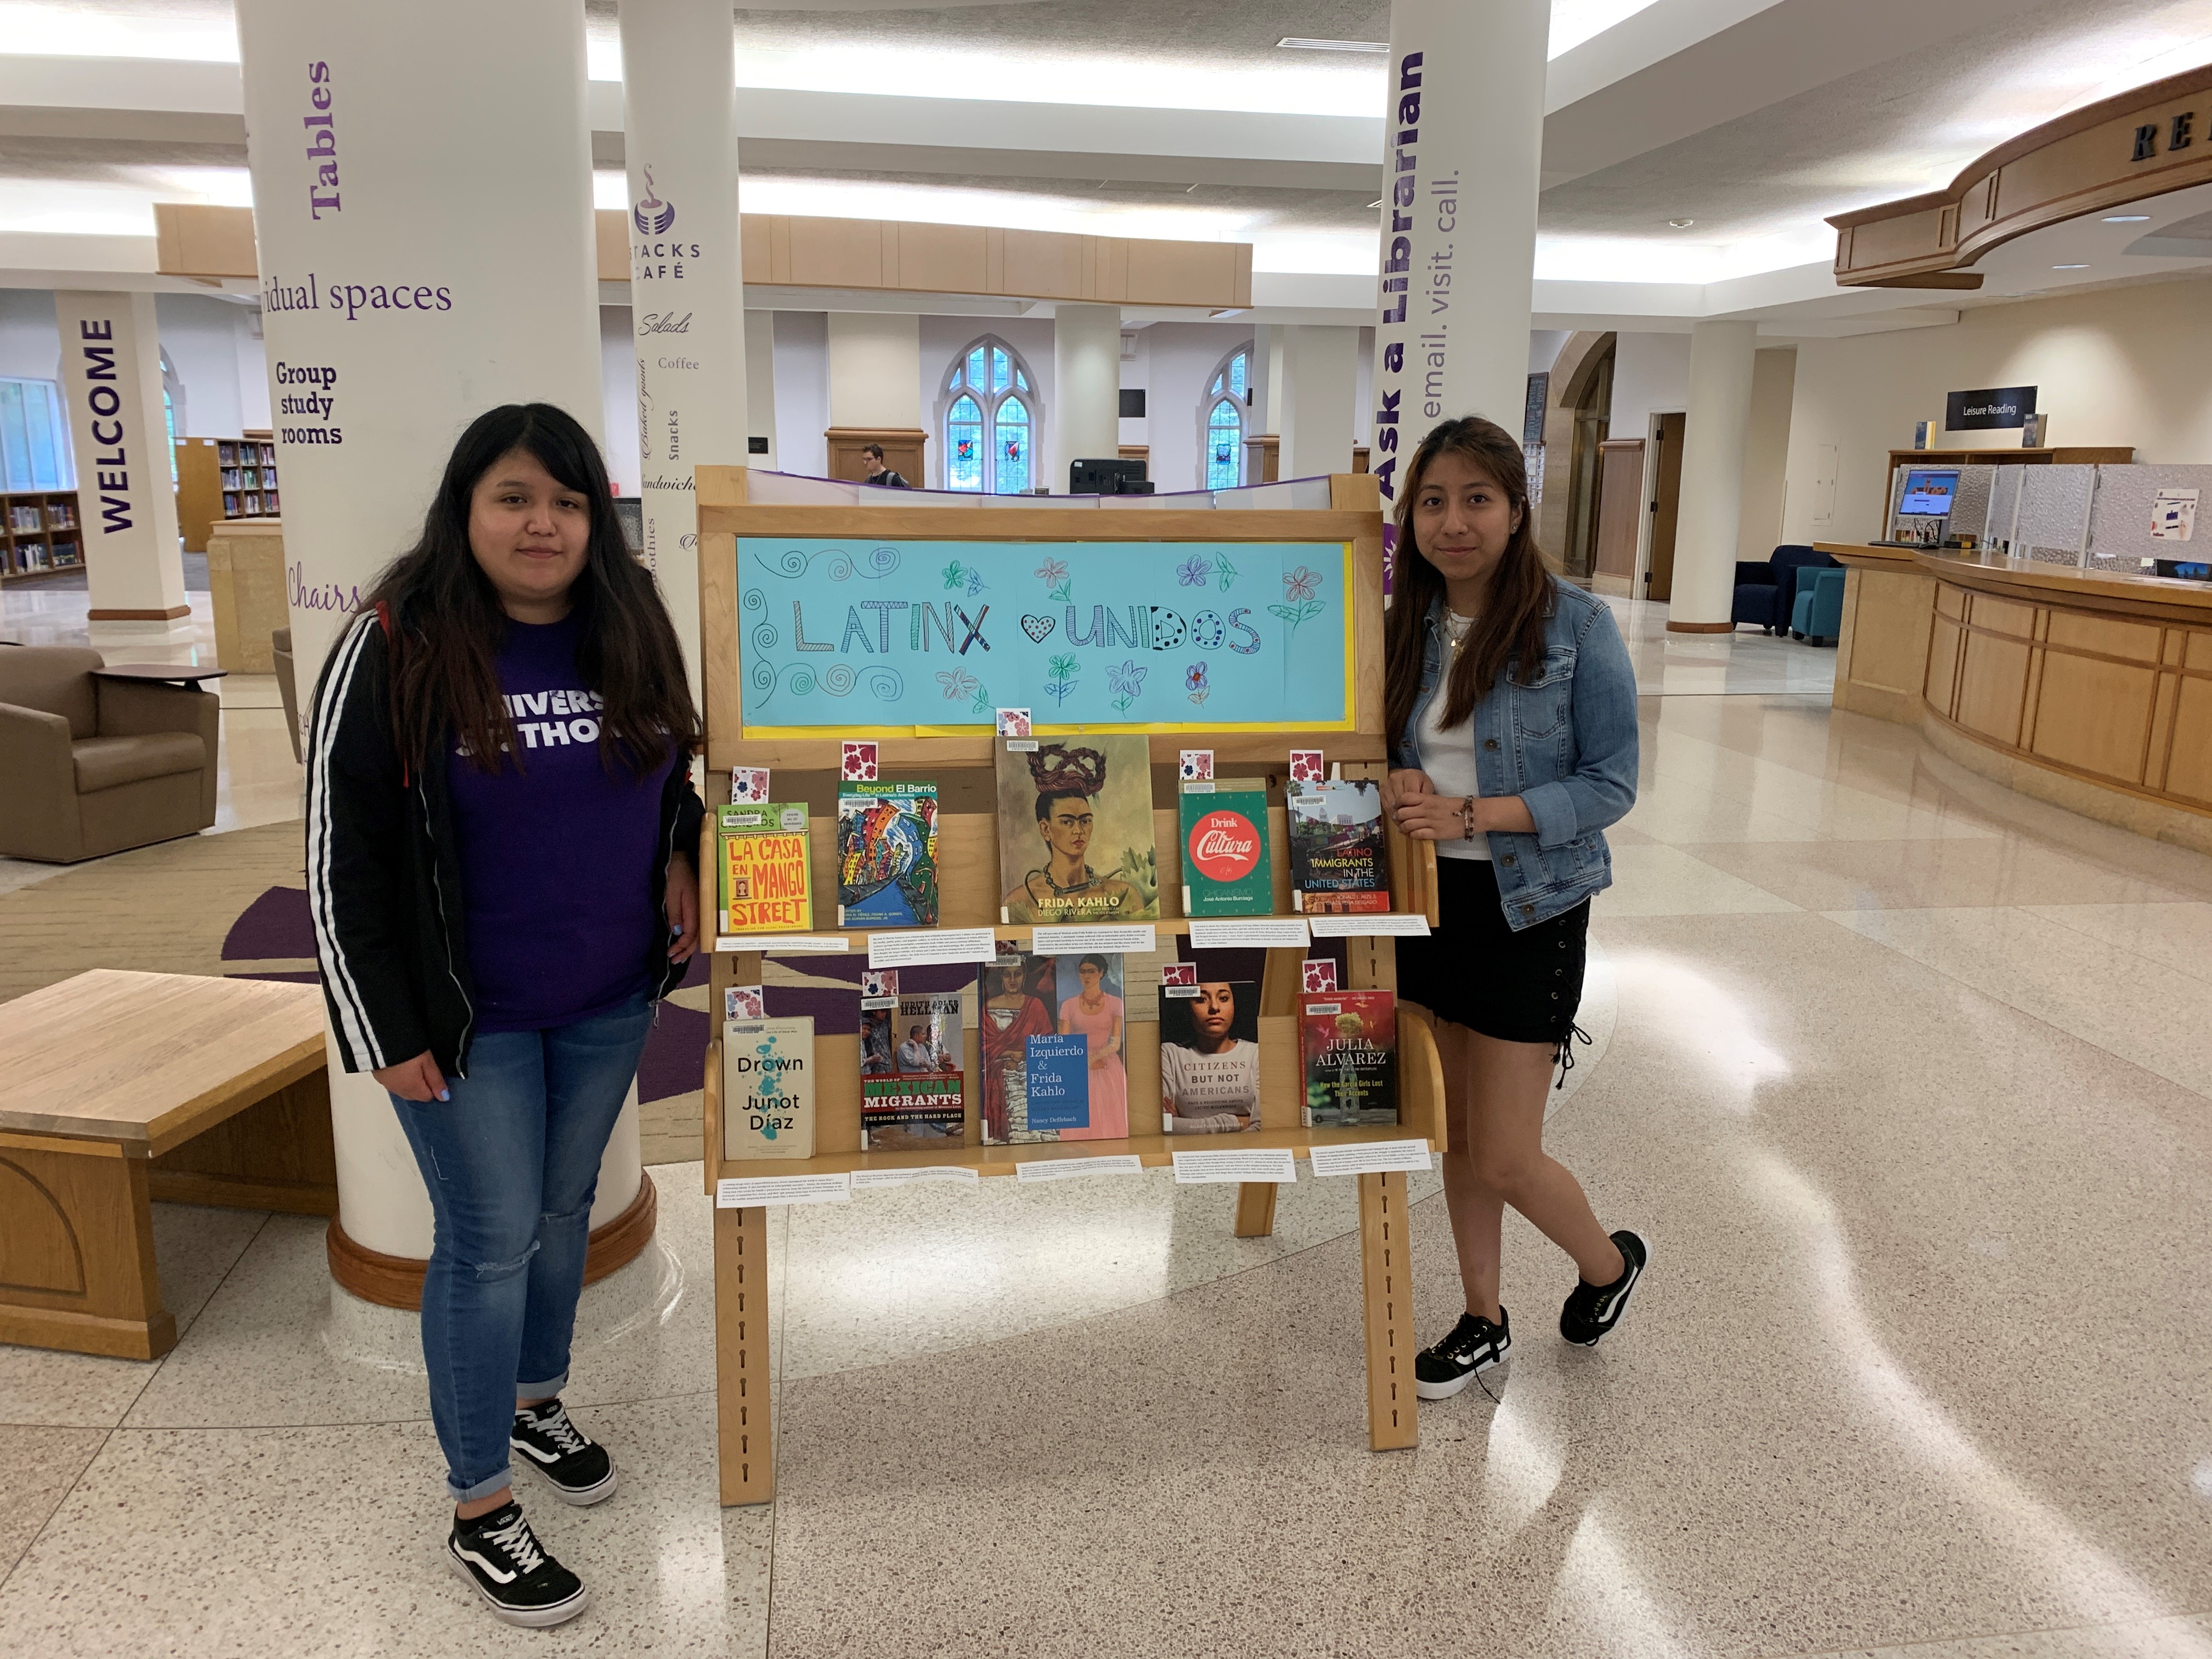 Two women stand in front of their book display titled "Latinx Unidos"